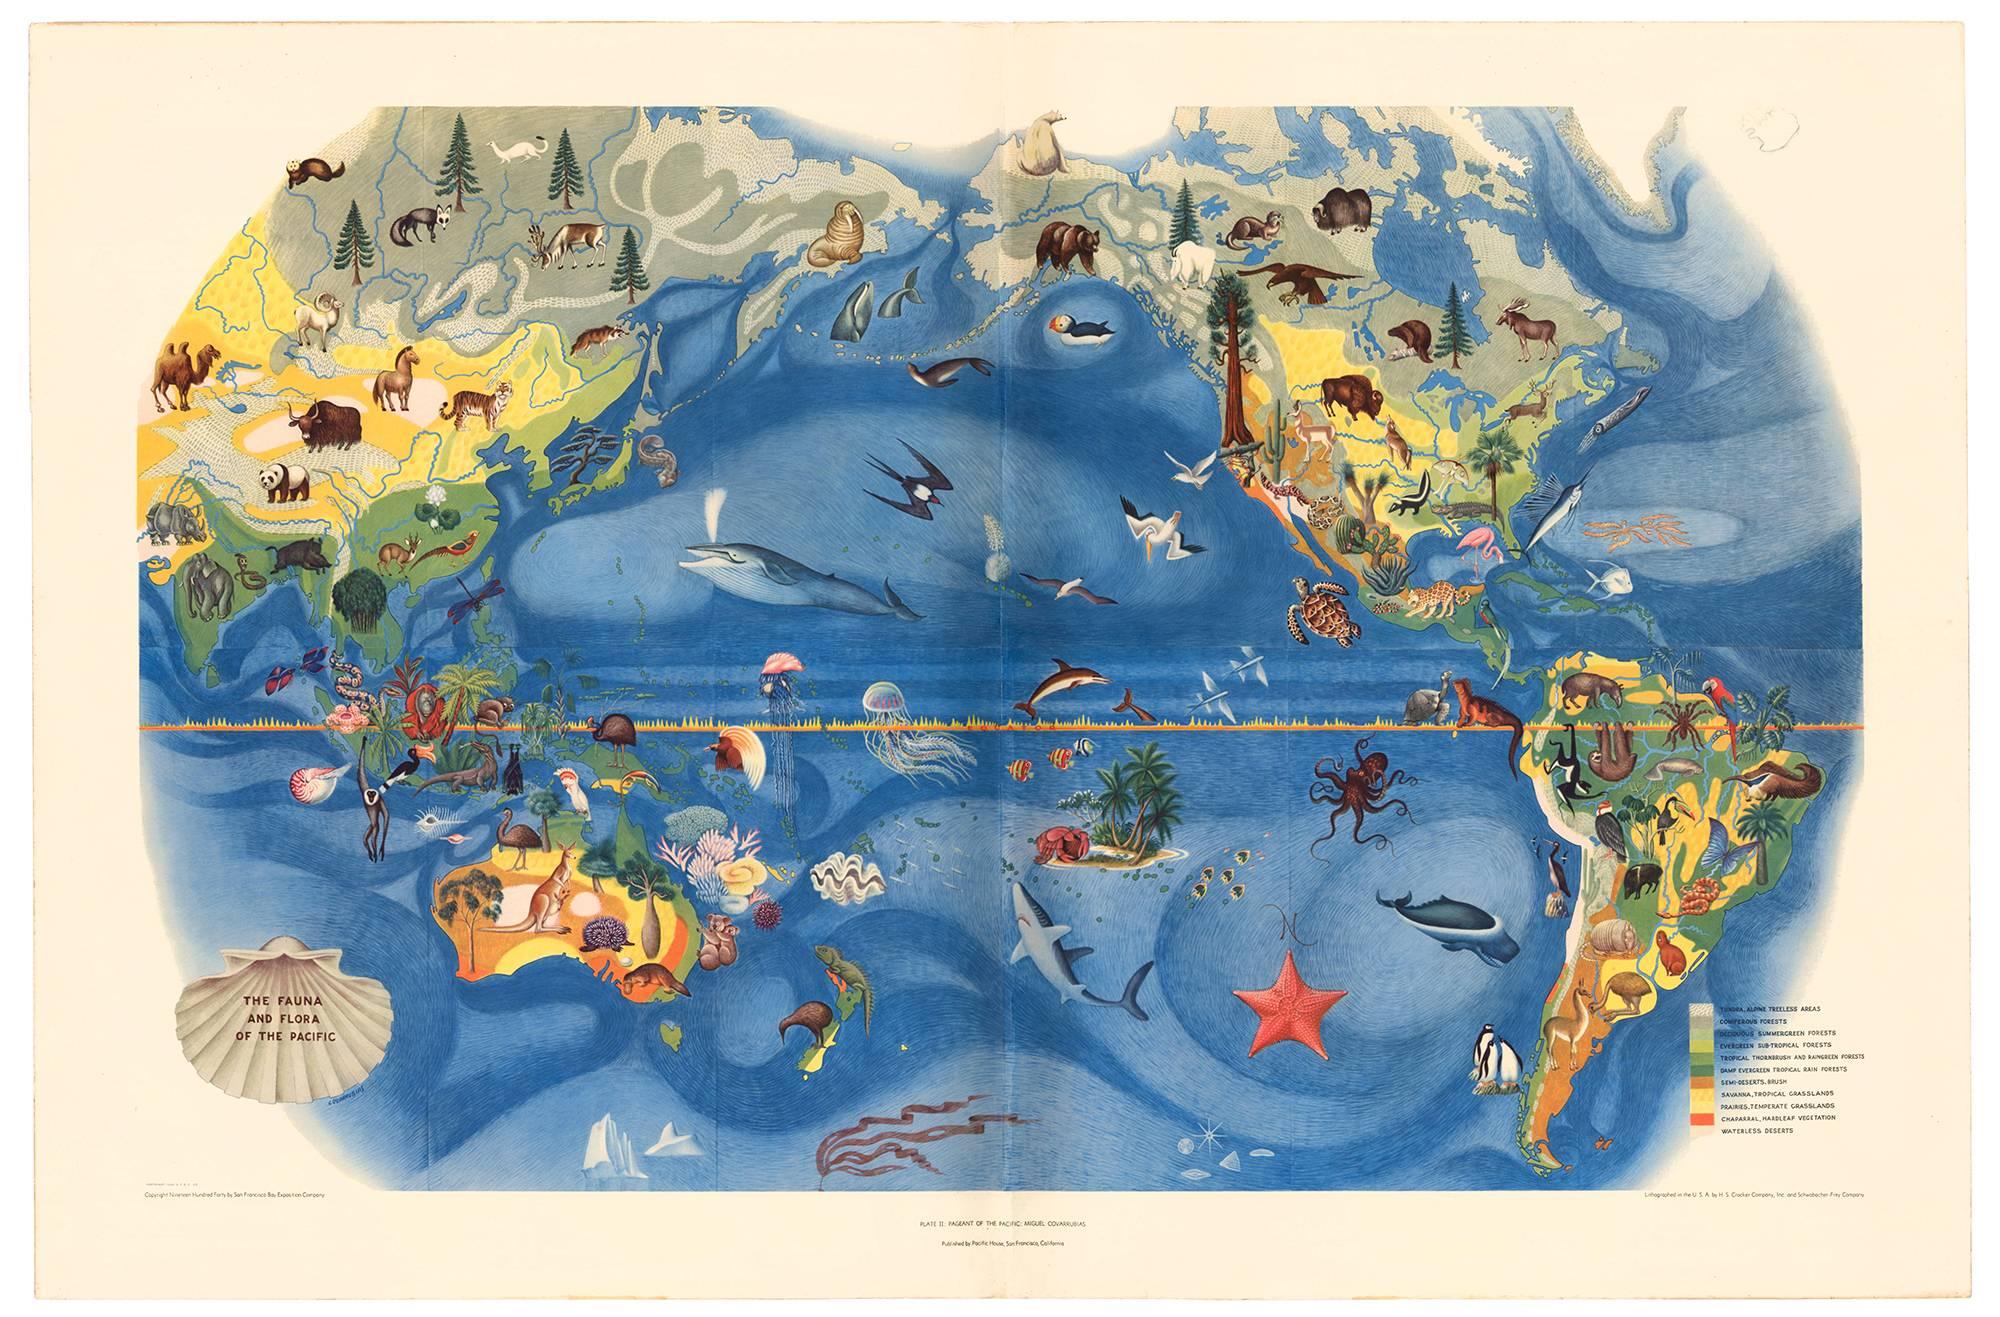 Pair of colorful maps by the Mexican painter, illustrator, filmmaker and anthropologist Miguel Covarrubias (1904-1957), referred to as Mexico's Renaissance Man. He painted six wall sized maps entitled 